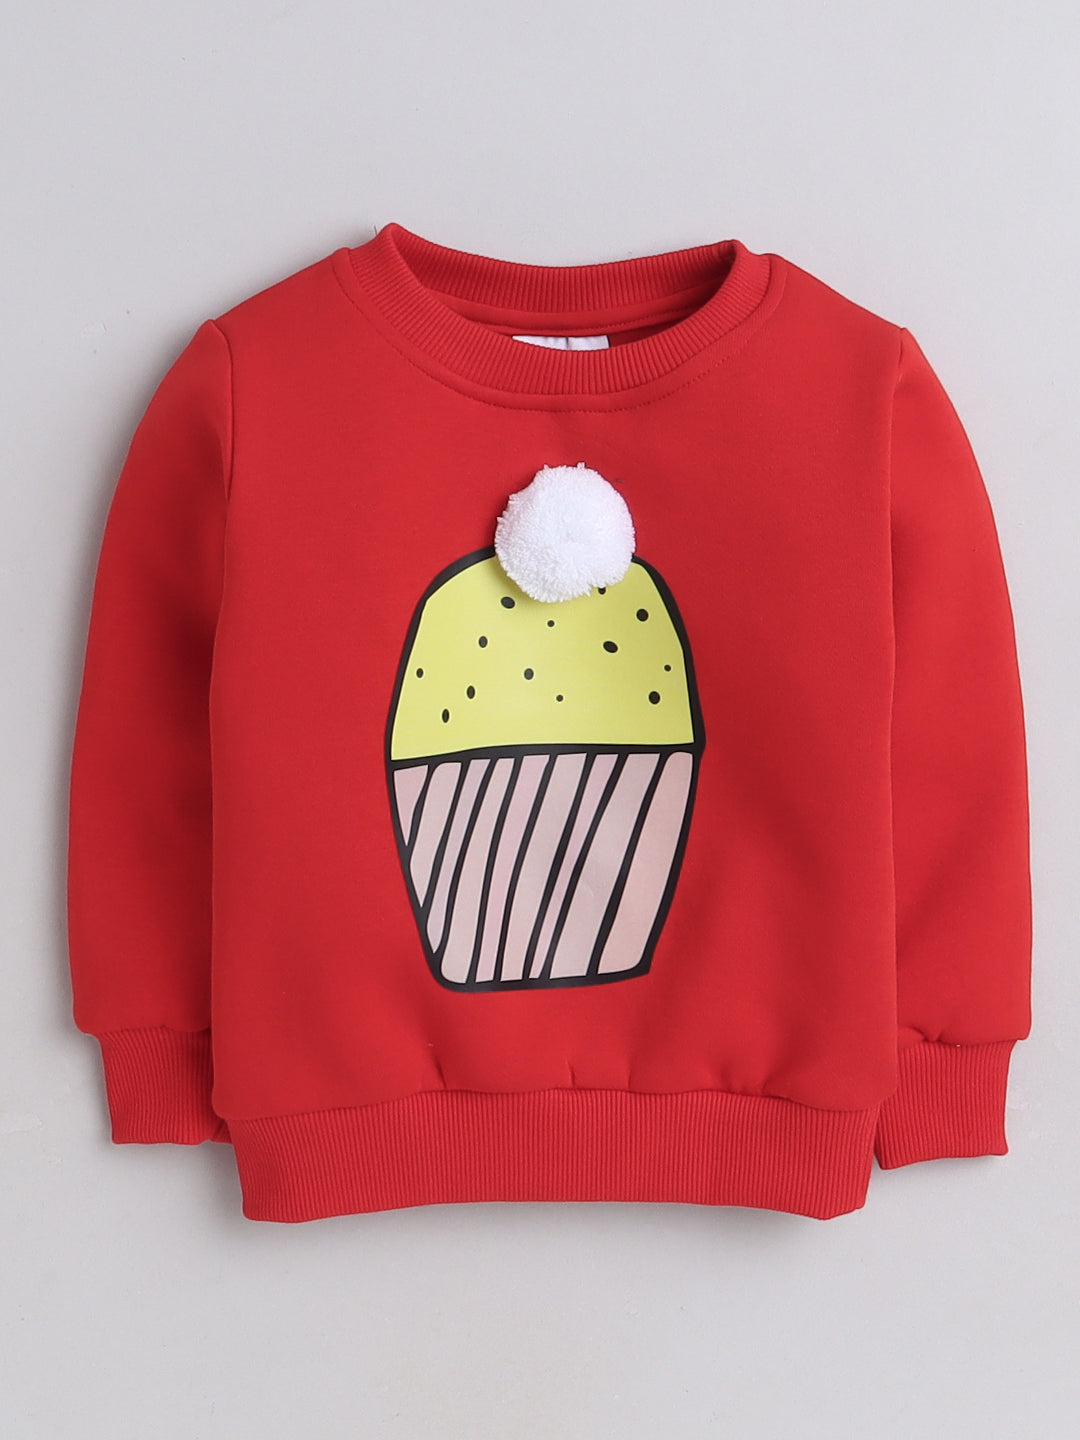 Knitting Doodles Kids' Sweat Shirt with Warm Fleece and Smart Cupcake print and a pom pom- Red